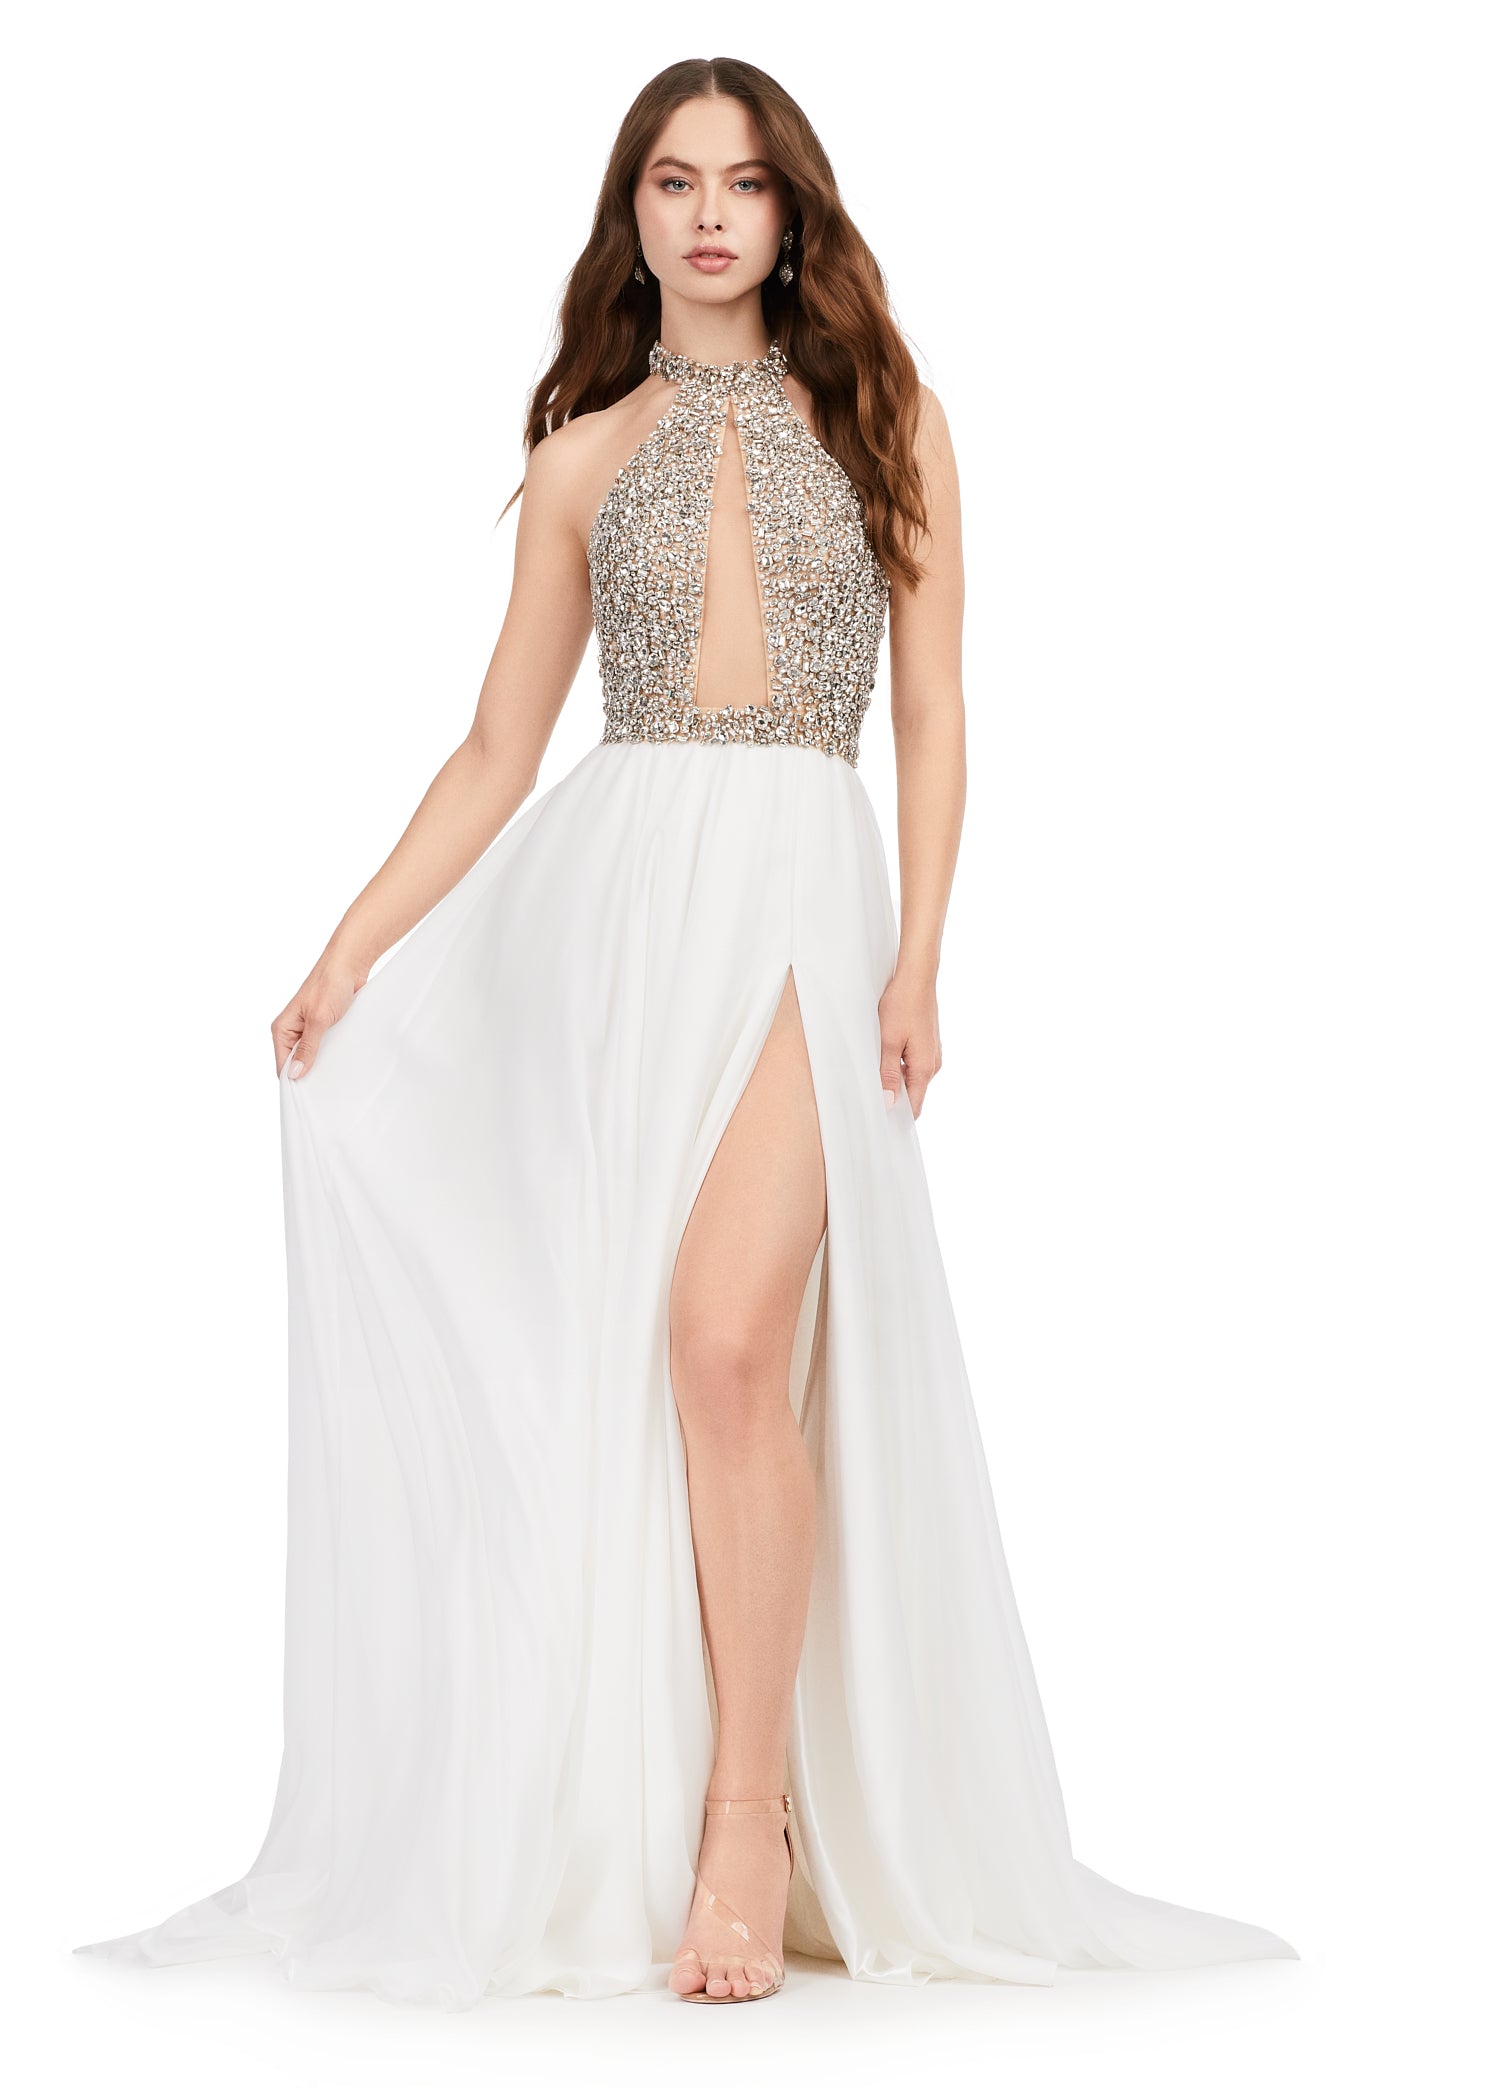 Ashley Lauren 11248 Chiffon Crystal Gown Beaded Bustier Maxi Slit Cross Back Halter Neckline A-Line Formal Dress. This chiffon A-line gown features a beautifully beaded halter top that is sure to shine bright at any event. The look is complete with an illusion cut out and high left leg slit.